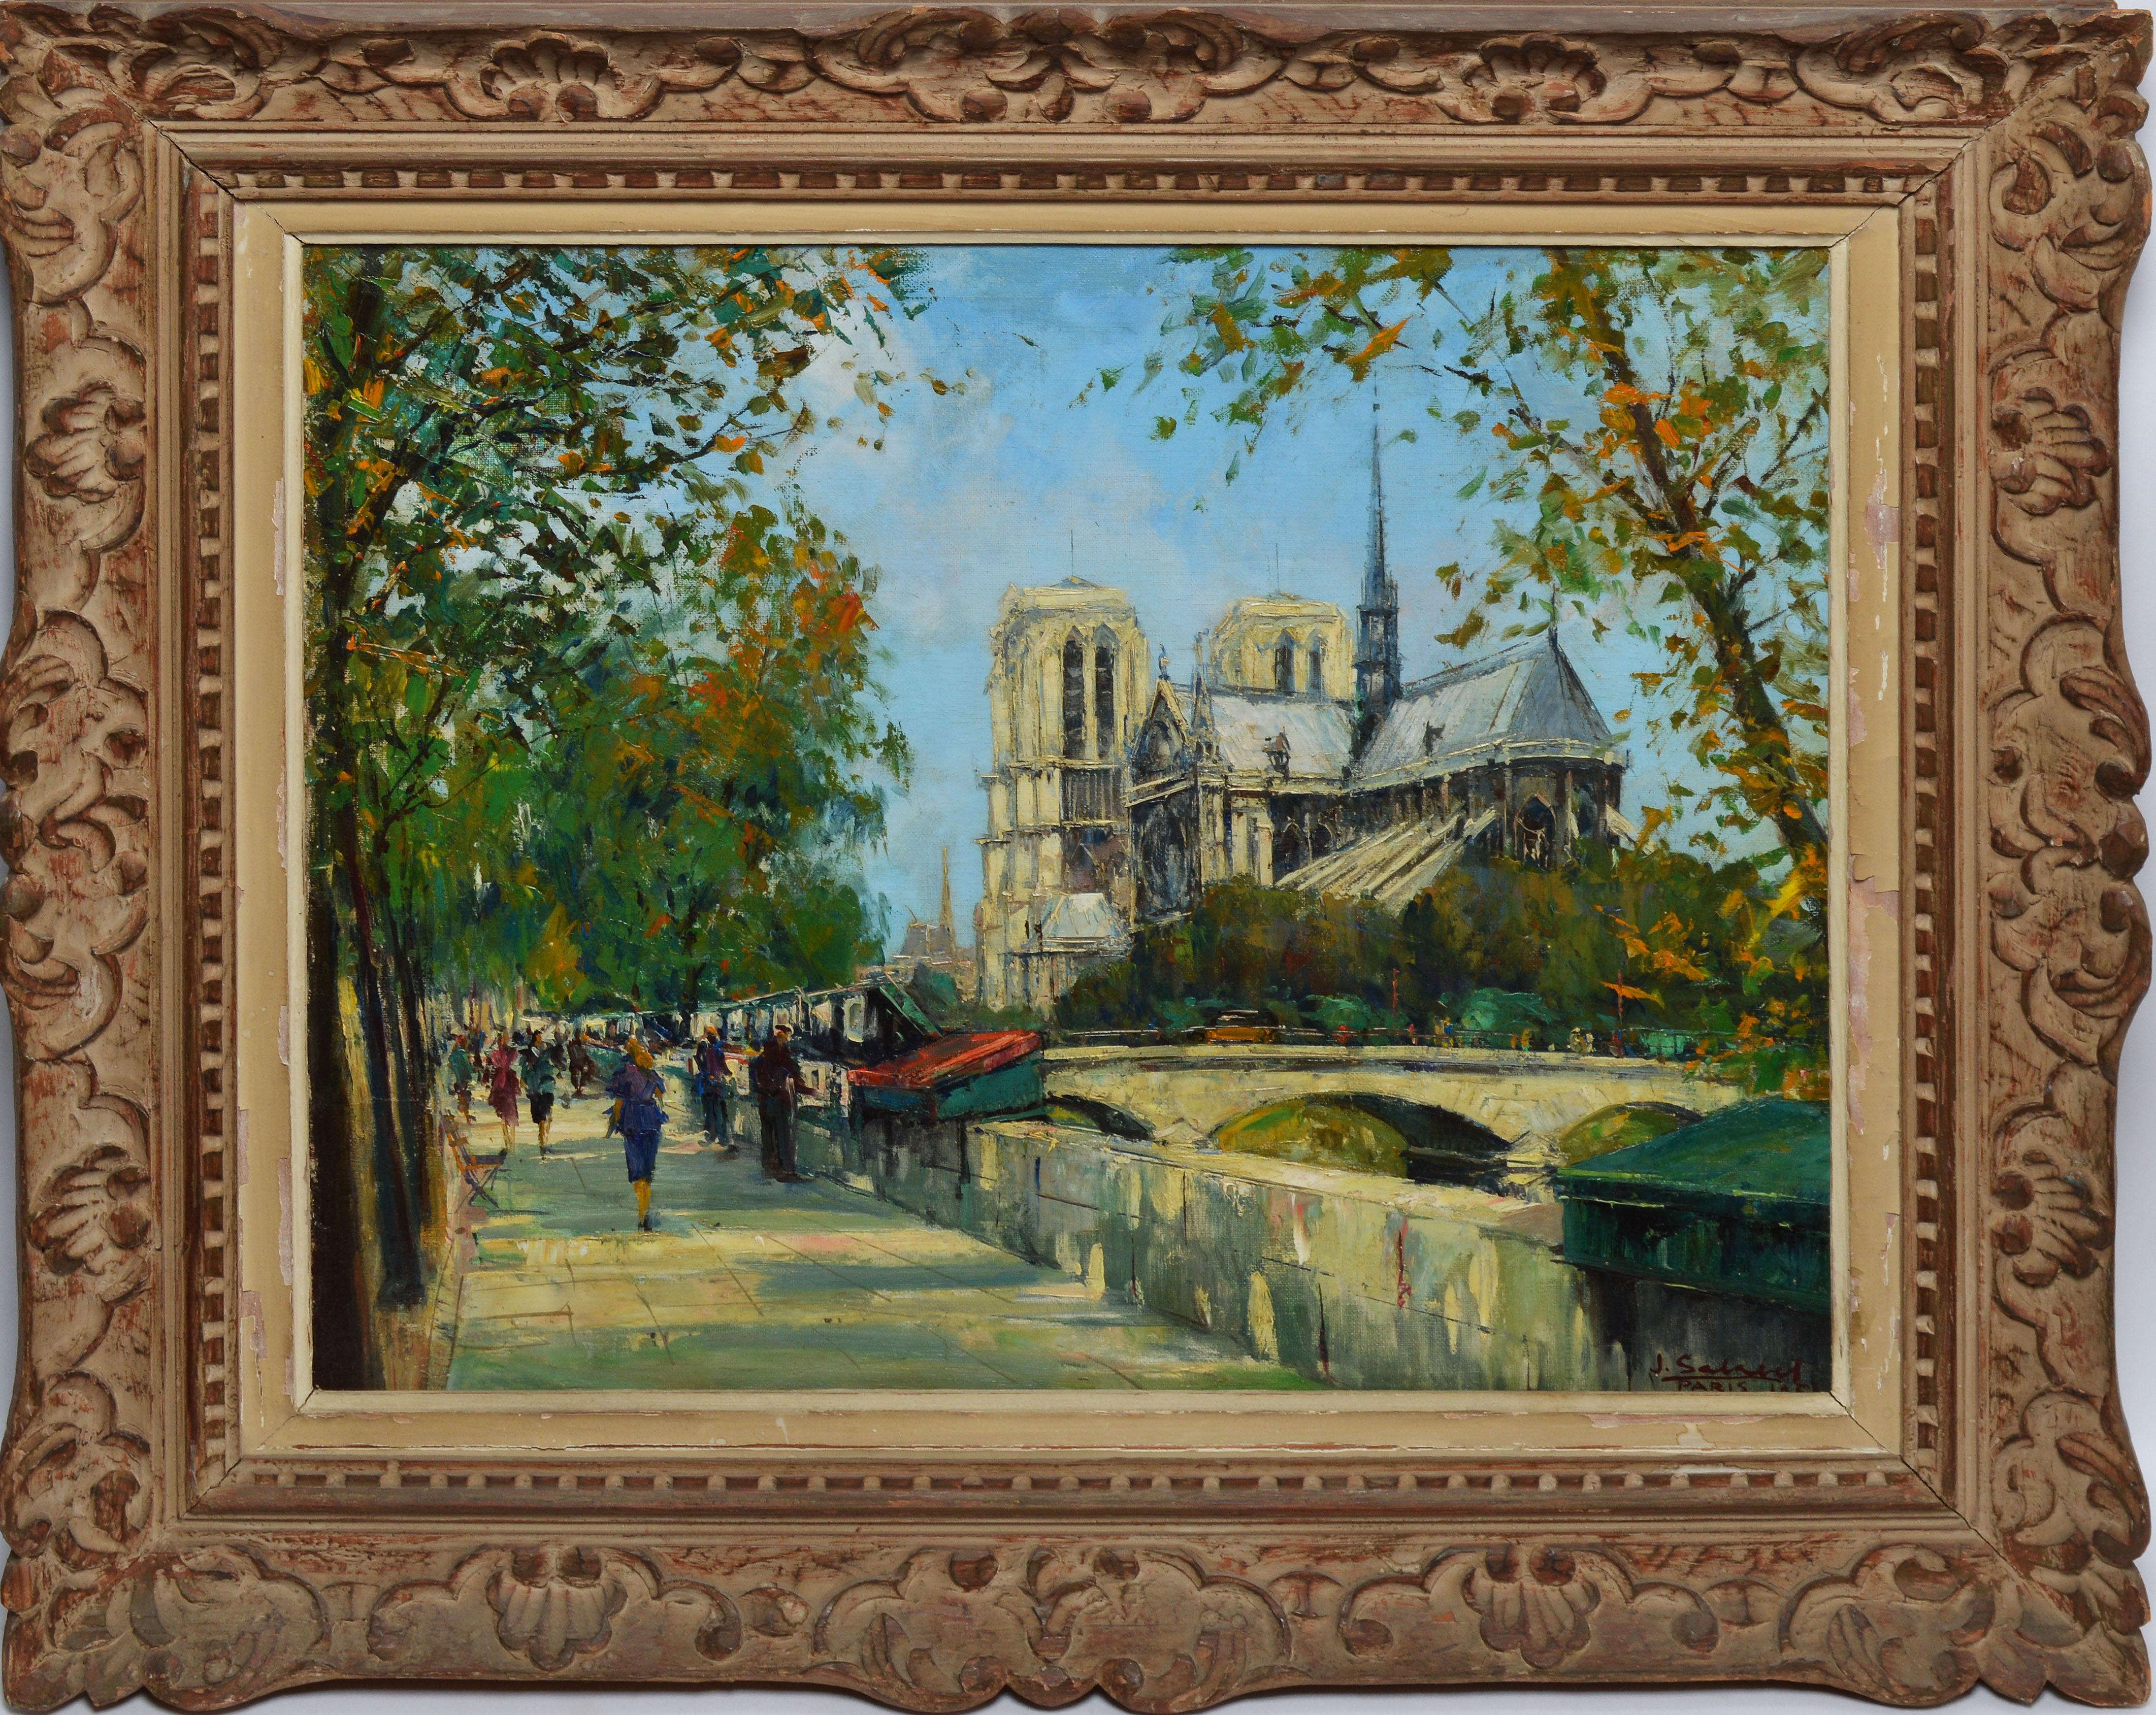 Antique French Impressionist painting Paris by Jean Salabet (b.1900).  Oil on canvas, circa 1930.  Signed lower right. 
 Displayed in a period impressionist frame.  Image size, 22"L x 18"H, overall 29"L x 25"H.